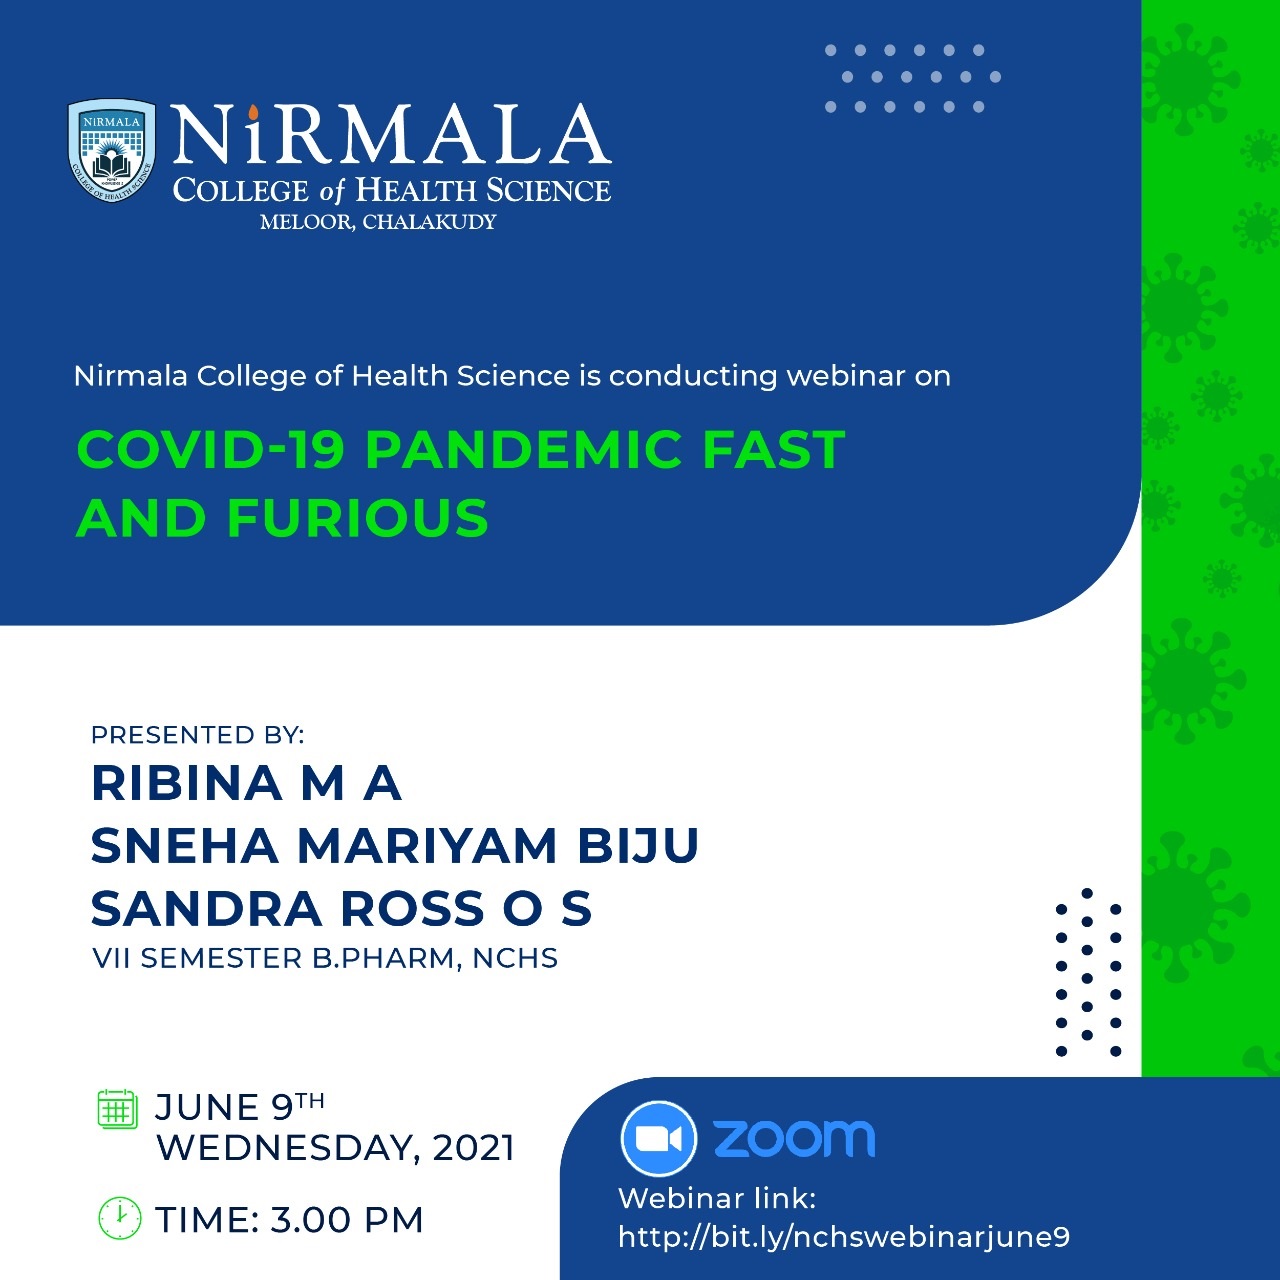 Webinar on Covid-19 Pandemic Fast and Furious